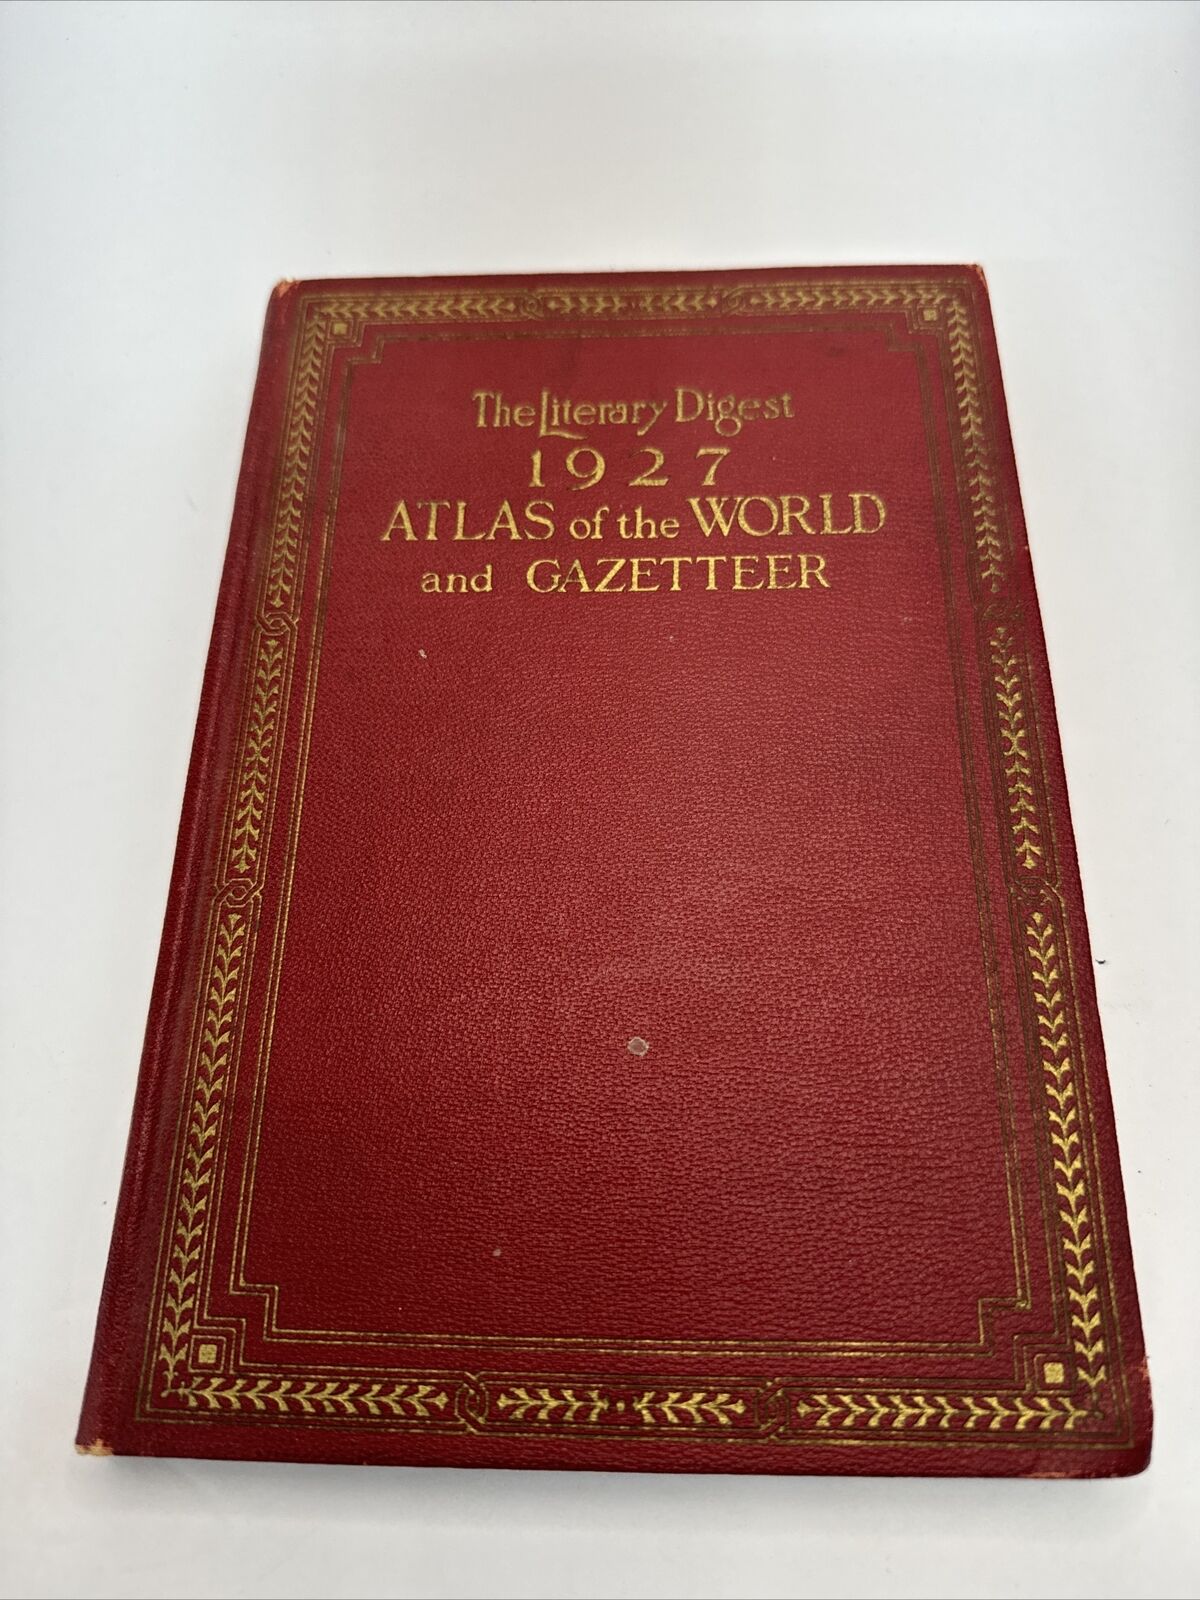 The Literary Digest 1927 Atlas of the World and Gazetteer